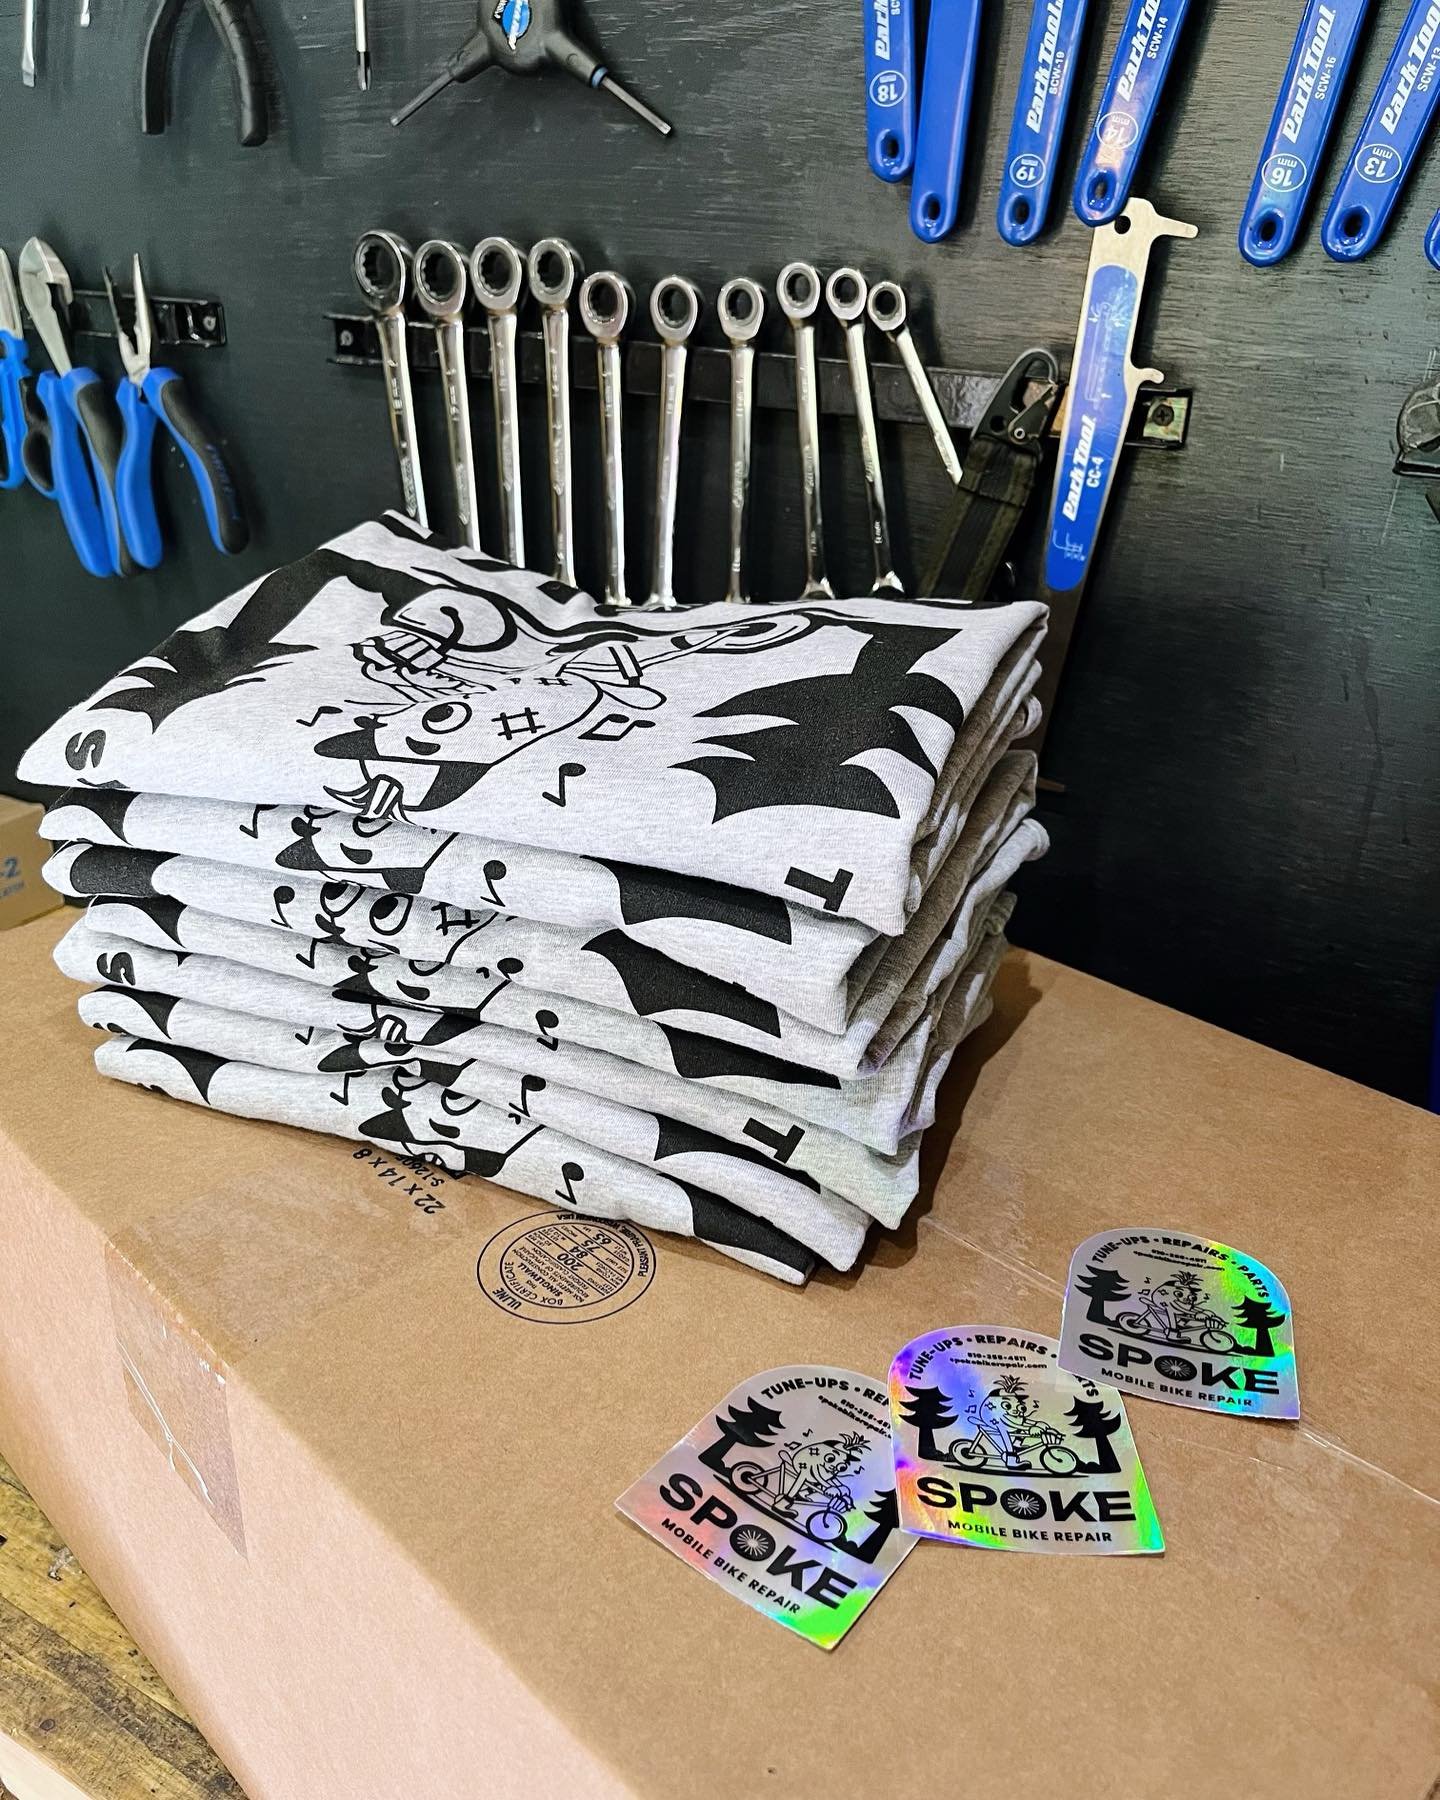 Shirts shipping out today. Thanks everyone for your support! 🙏 

We have a few sizes left so be sure to grab one for yourself before they&rsquo;re gone! We also have stickers available 🤙.

#vgkids #stickermule #spokemobilebikerepair #isupportmybike